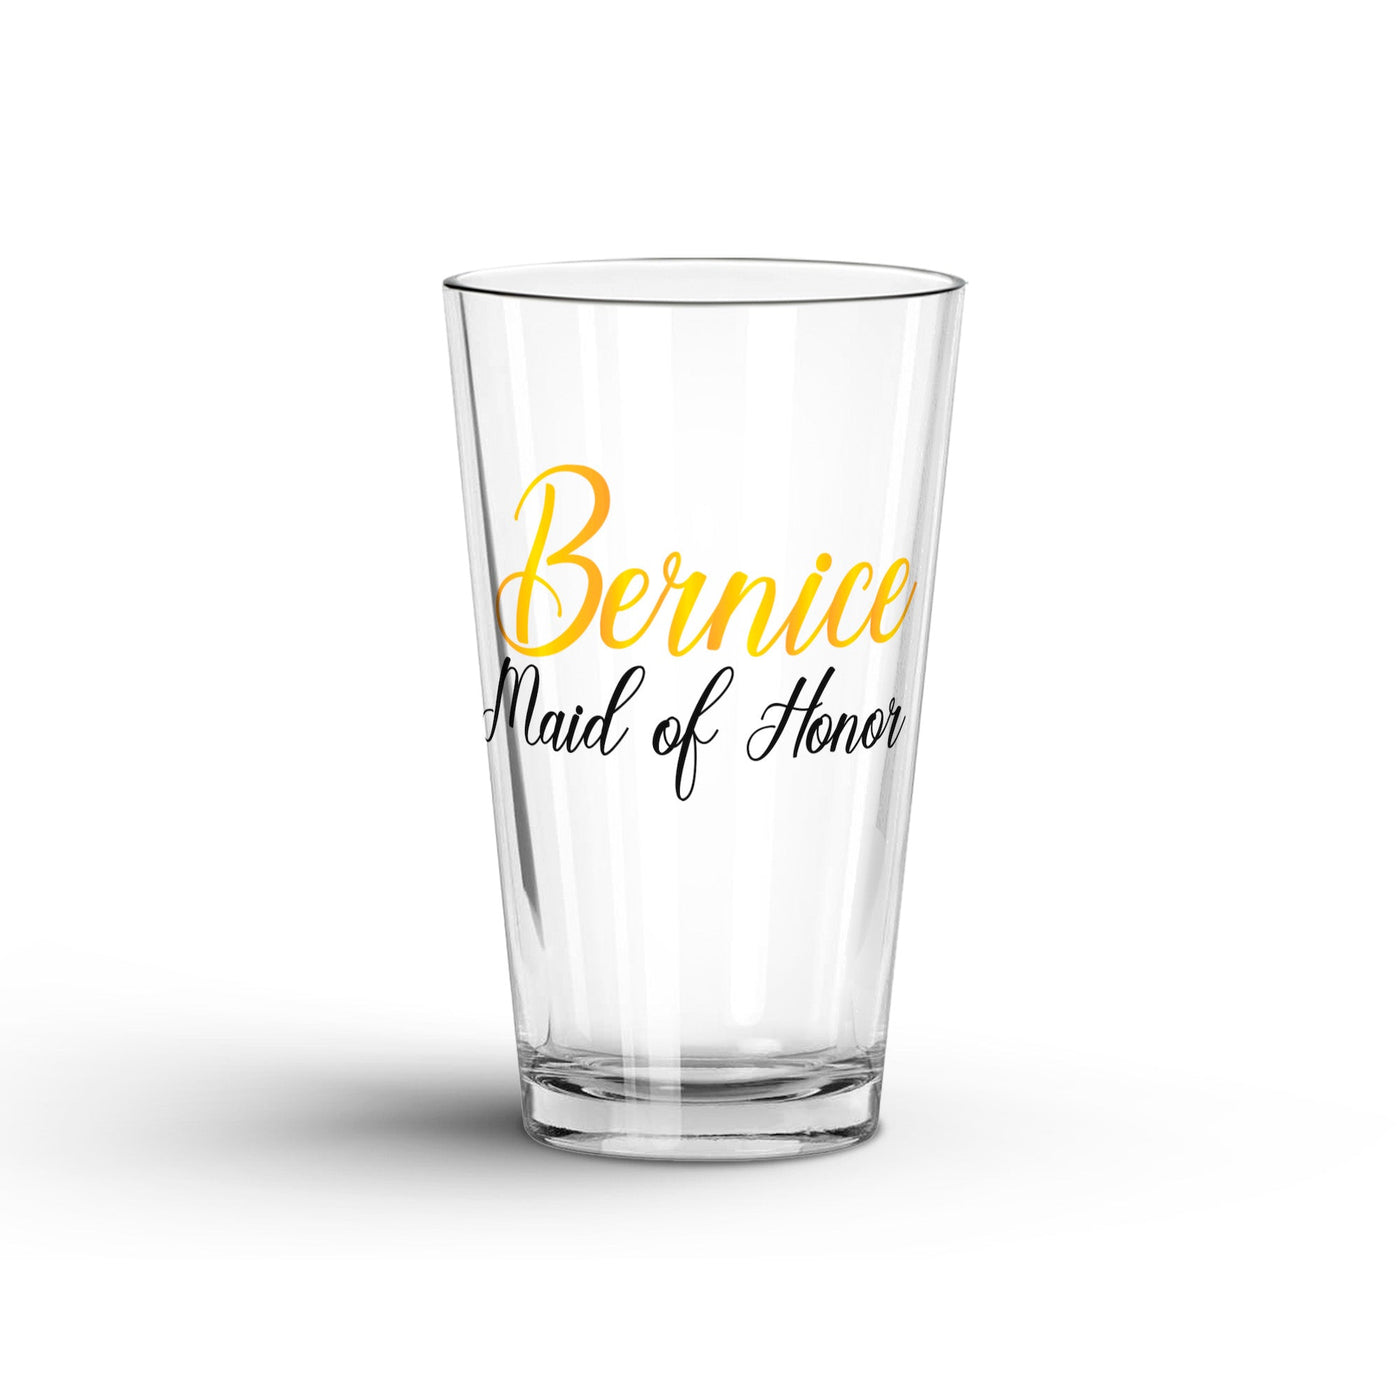 Glass Tumbler: Personalized Maid Of Honor Pint Glass Glass Tumbler Sam + Zoey  Sam + Zoey